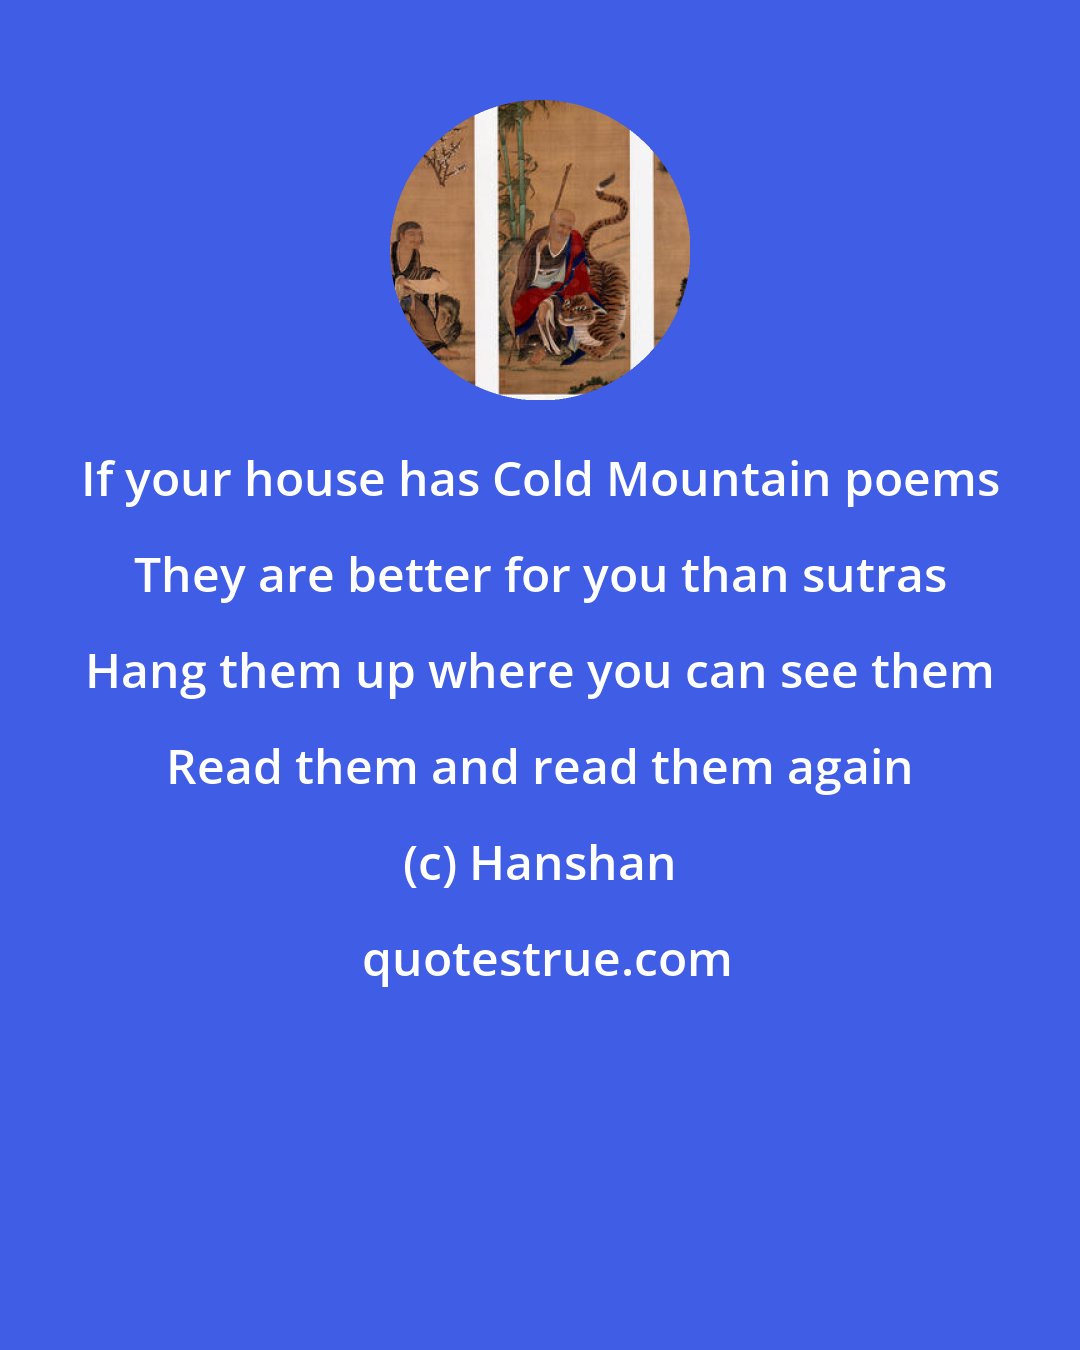 Hanshan: If your house has Cold Mountain poems They are better for you than sutras Hang them up where you can see them Read them and read them again